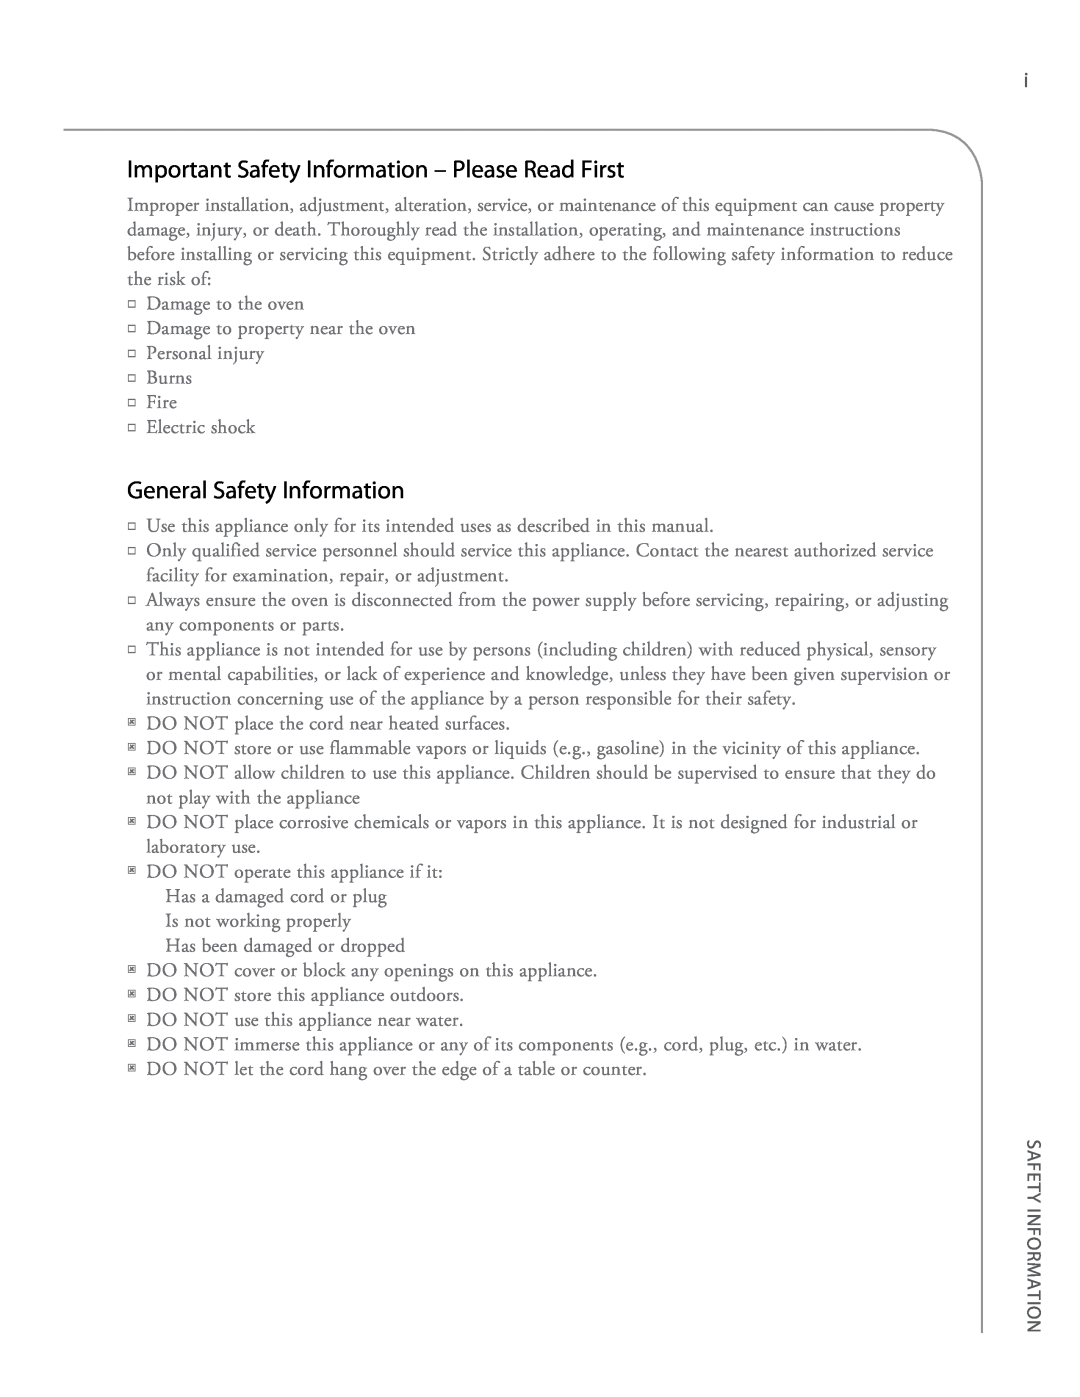 Turbo Chef Technologies 2020, 2620 owner manual Important Safety Information - Please Read First, General Safety Information 